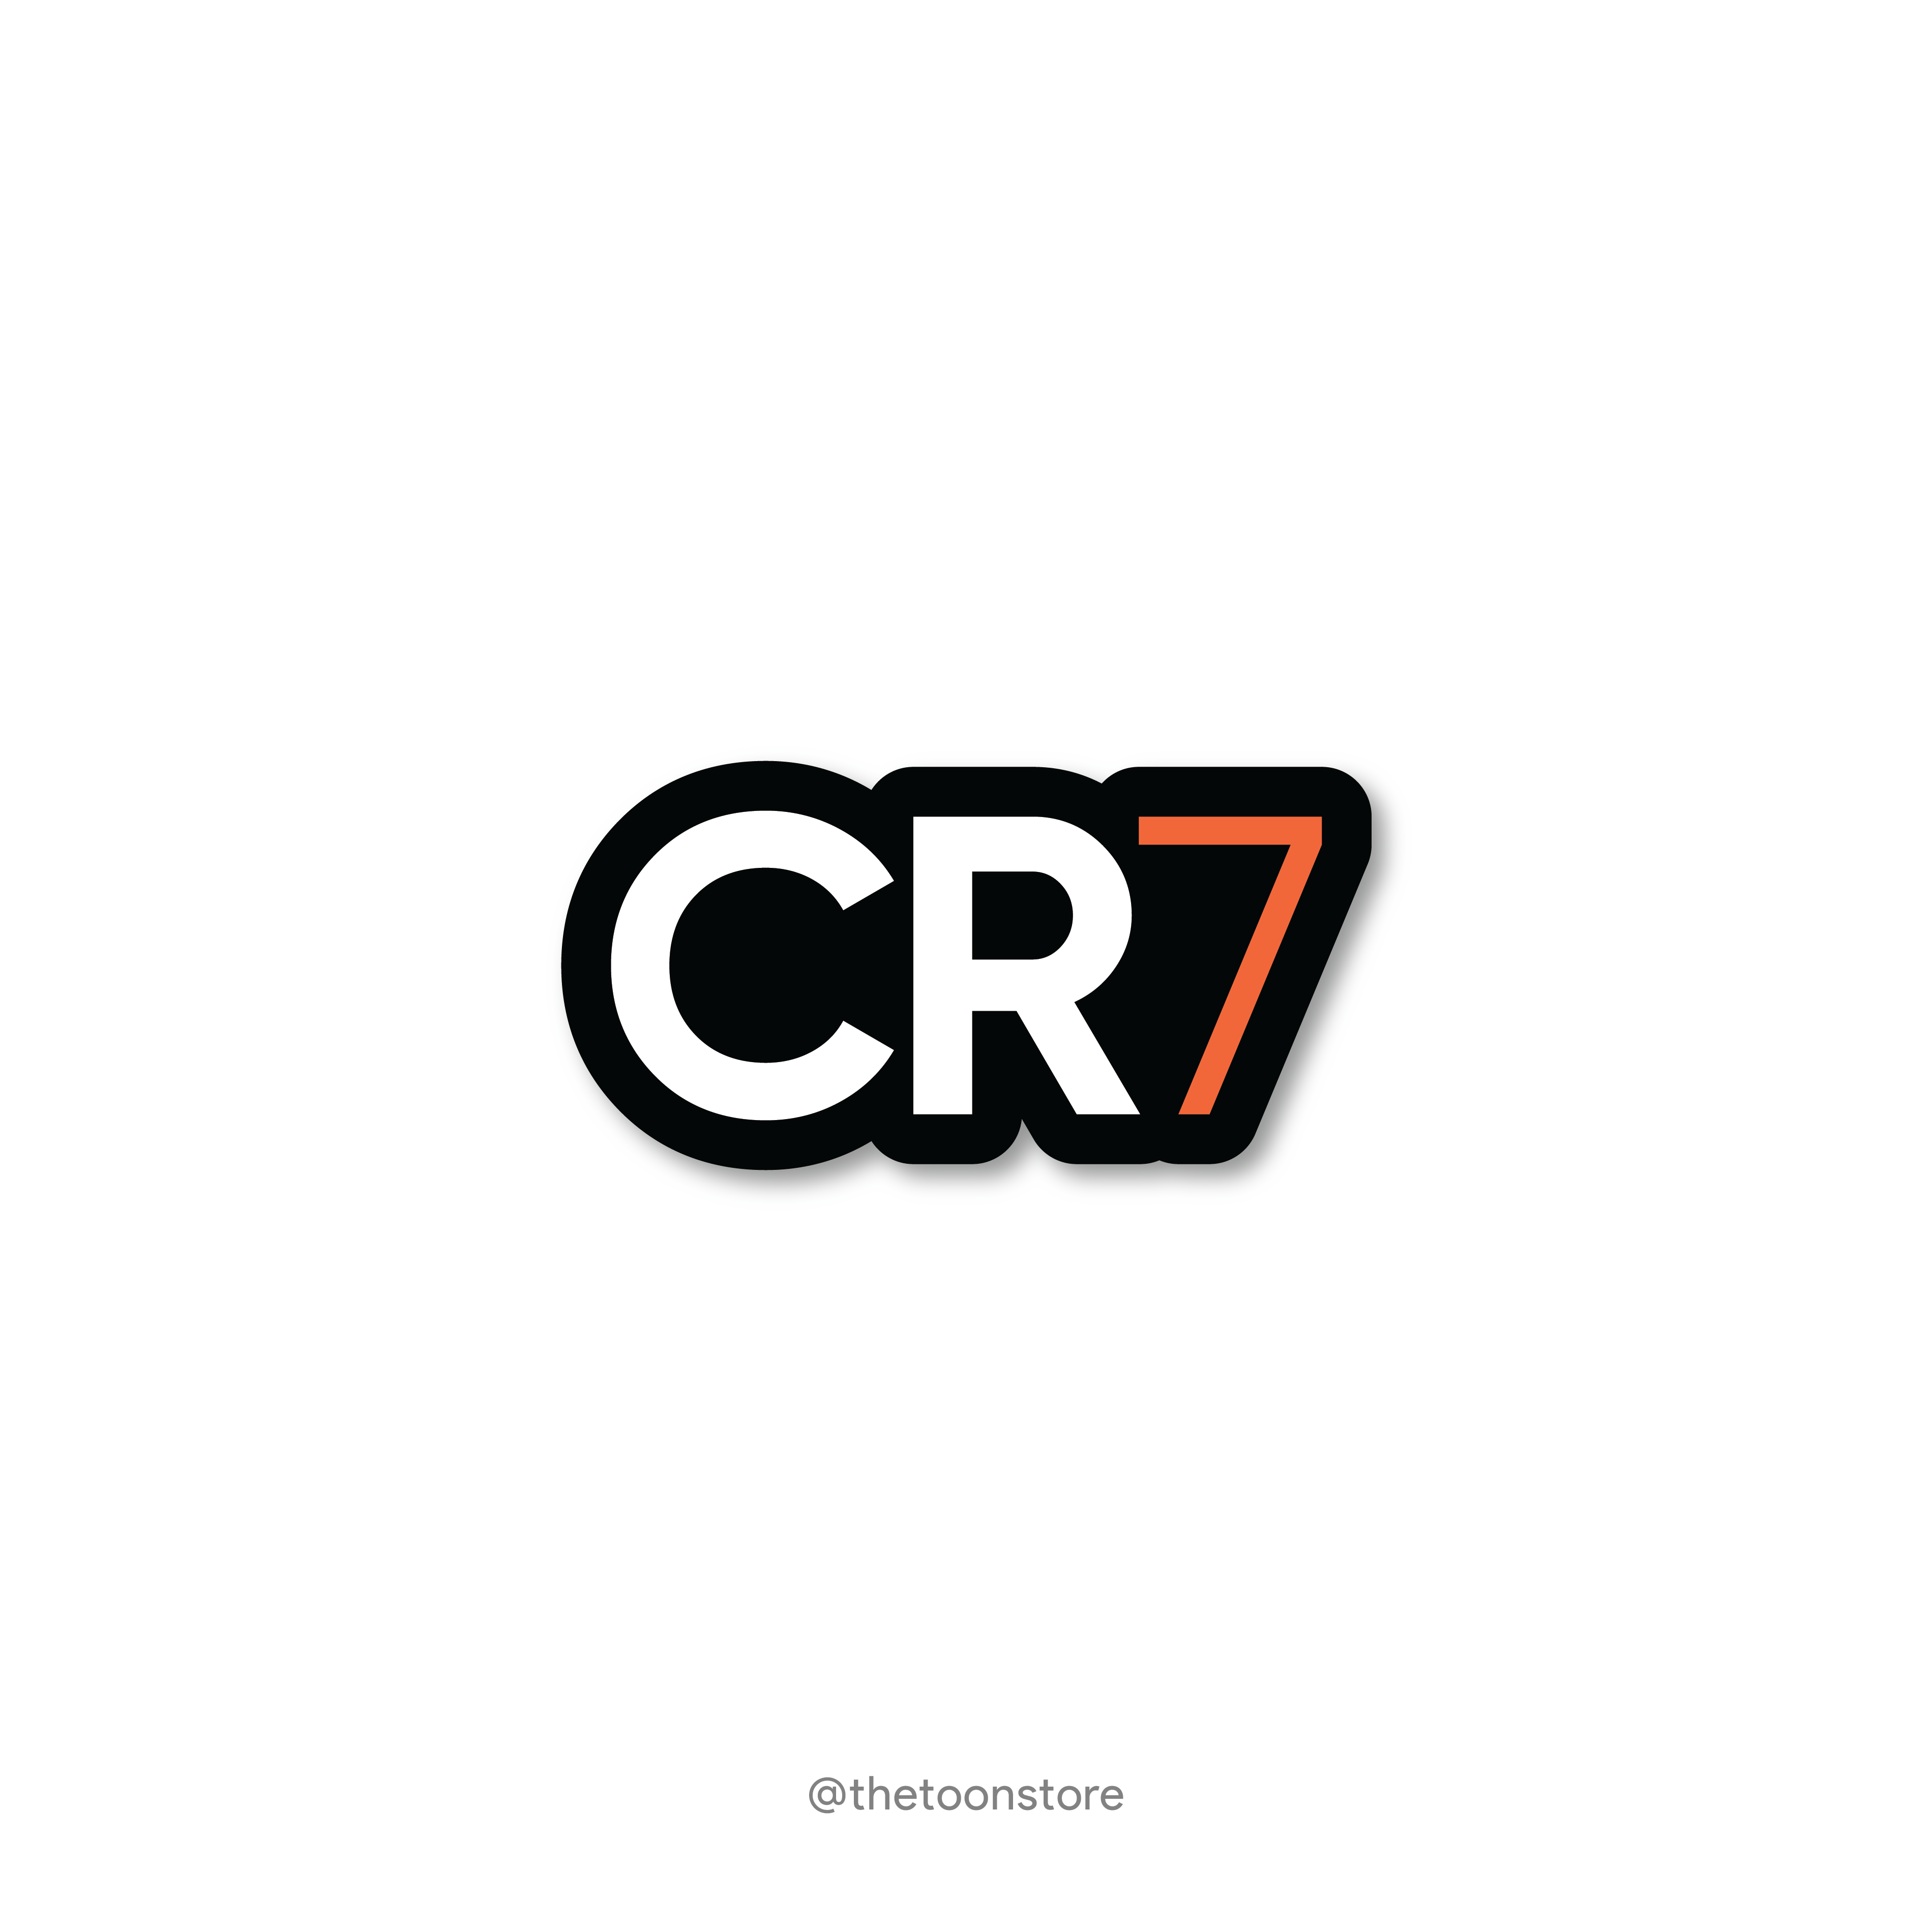 China Exclusive Nike CR7 Collection + All-New Chinese CR7 C罗 Logo Released  - Footy Headlines